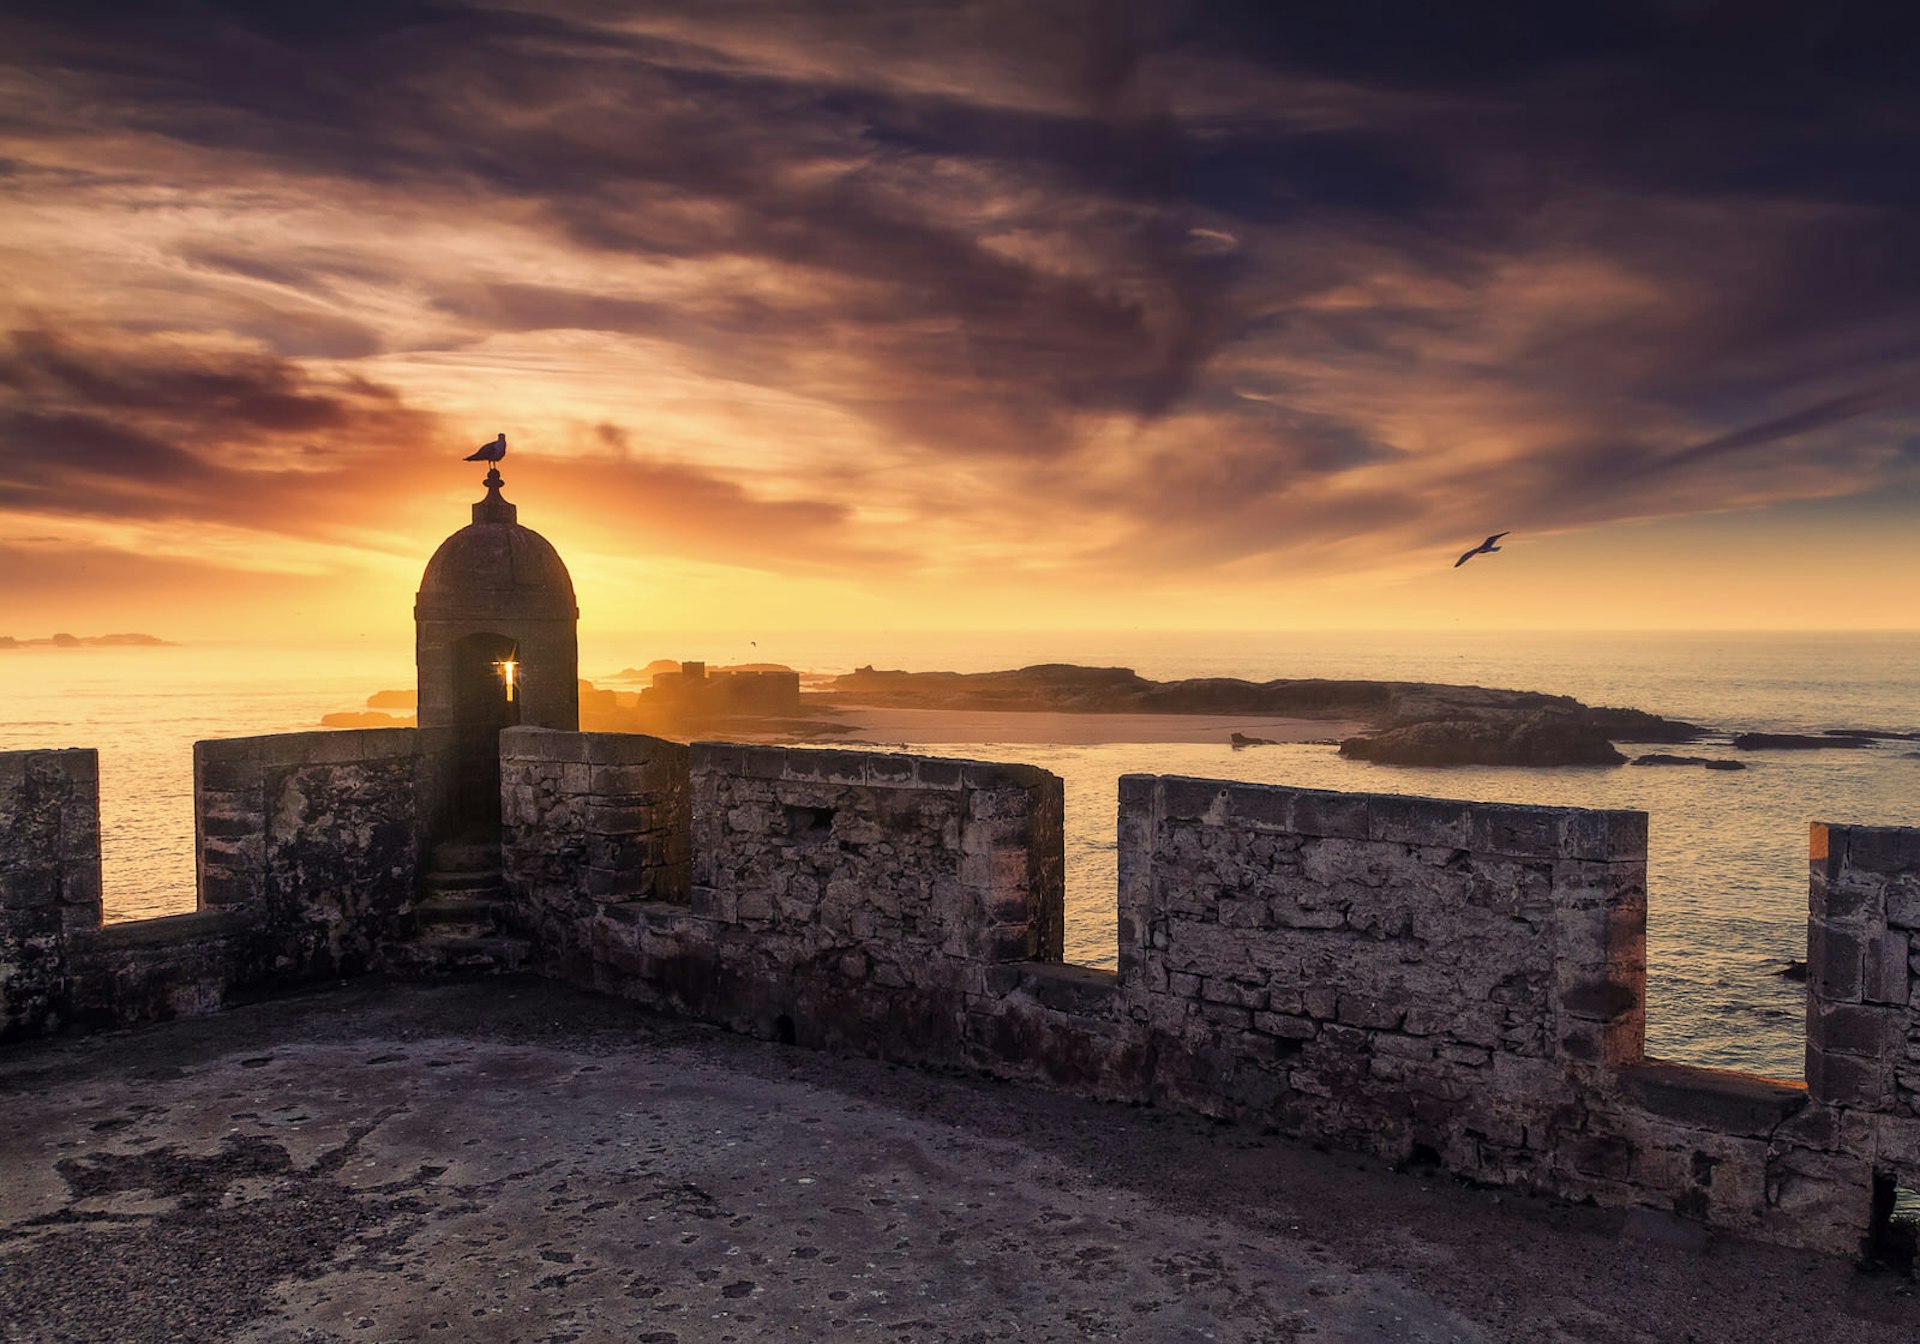 Sunset over the ramparts of Essaouira, Morocco. Image by Carlos M Almagro / 500px